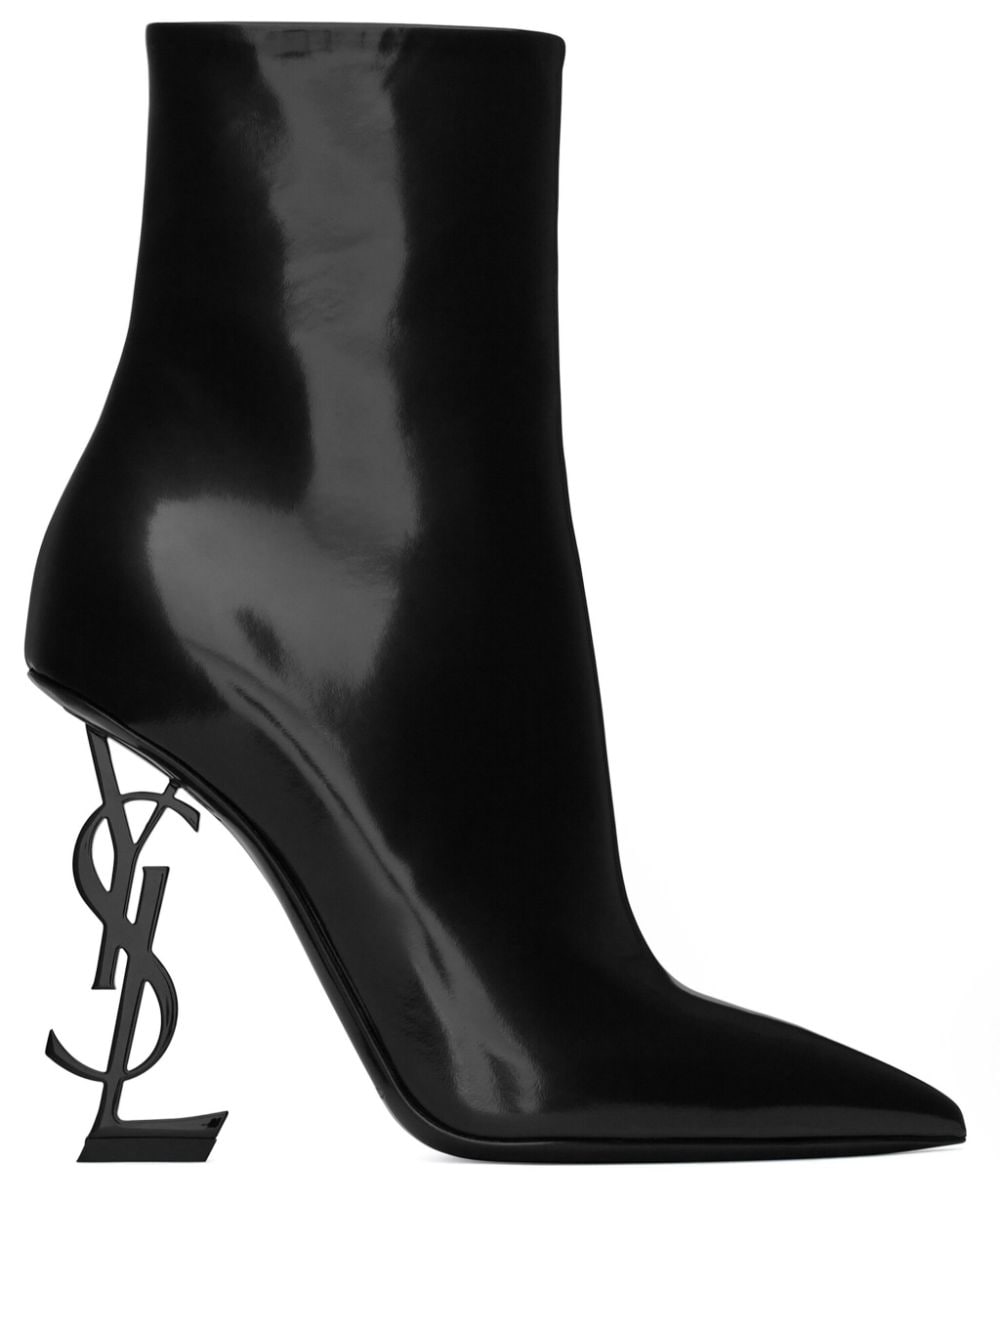 SAINT LAURENT Sophisticated Opyum 110mm Leather Boots for Women - Black